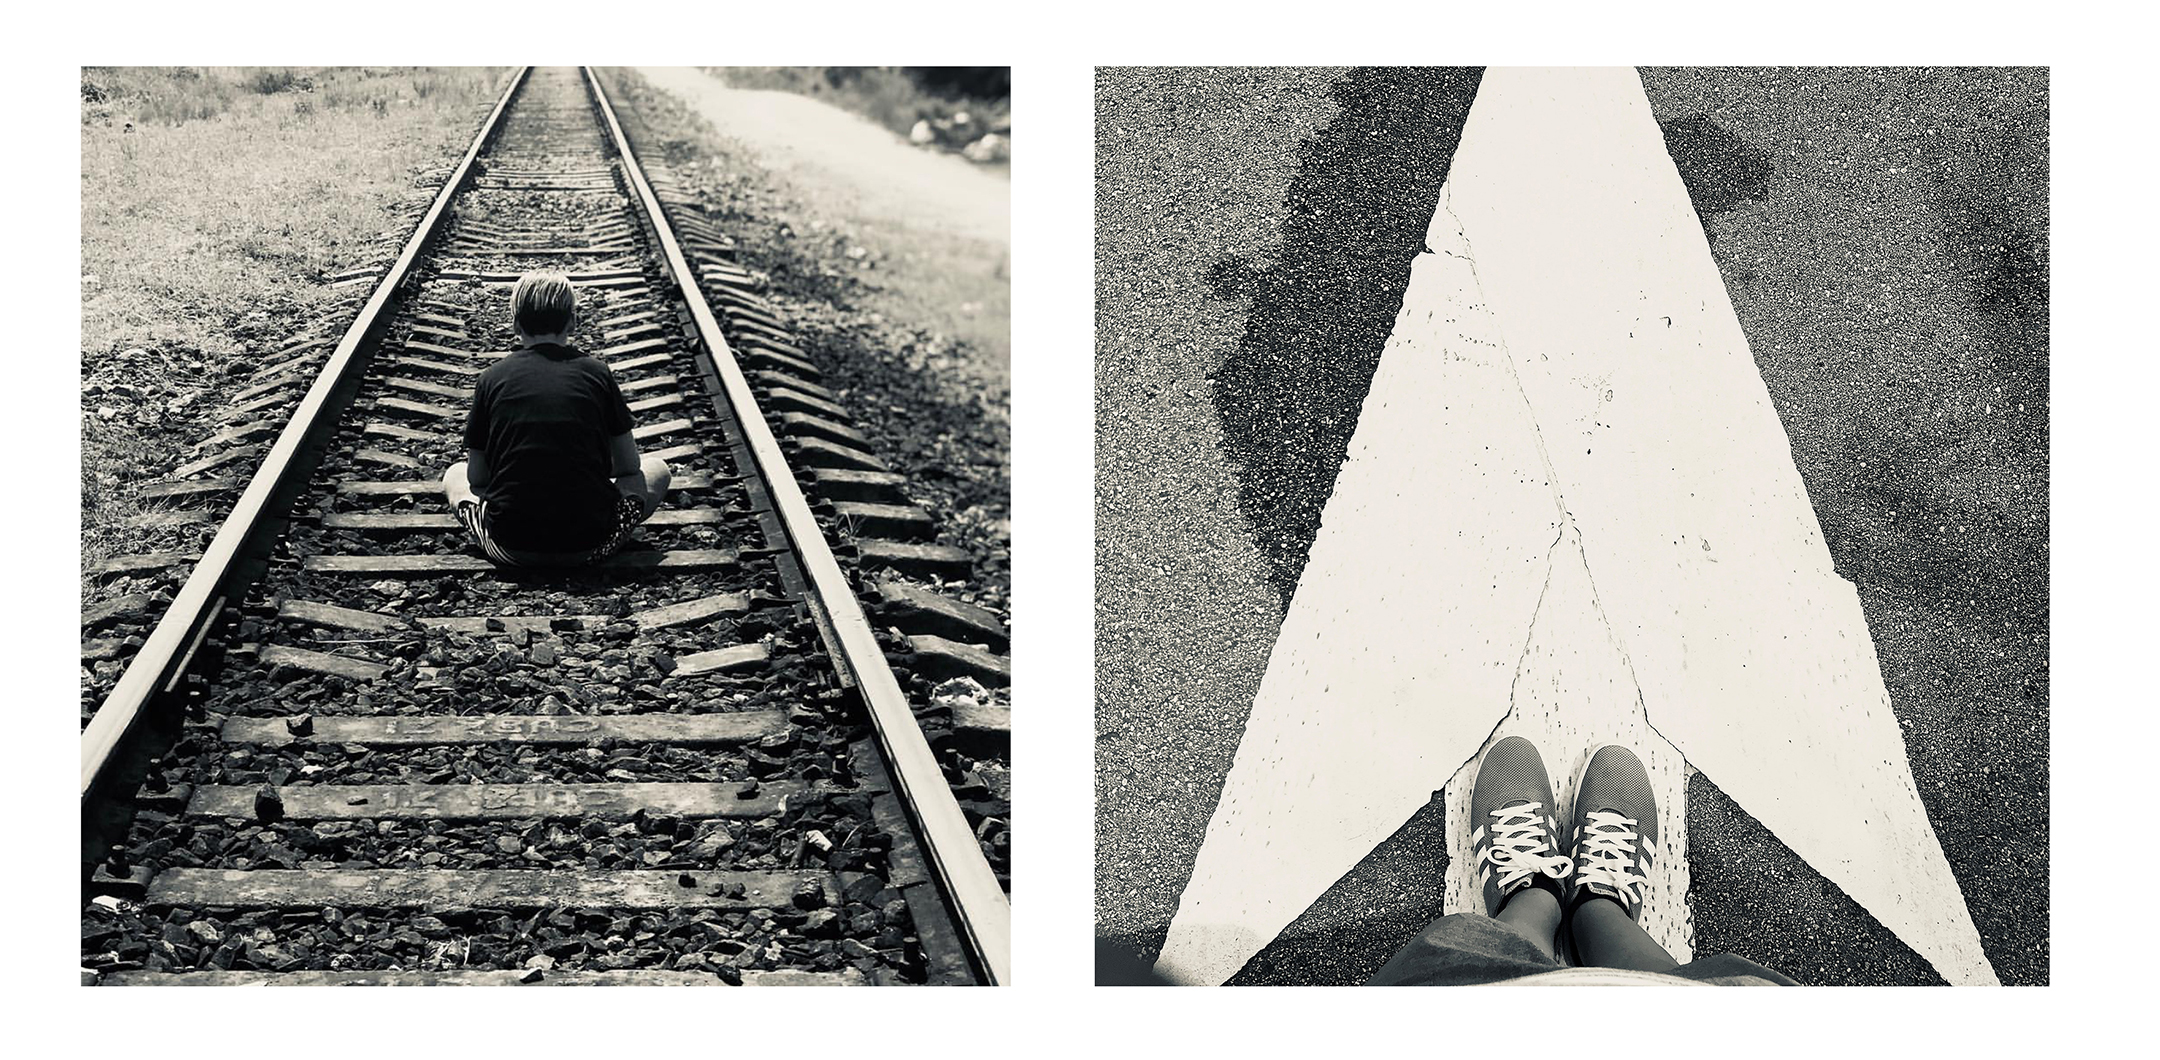 Two black and white photos, side by side, the one on the left of a young man sitting on a train track with his back to the camera, the one on the right a person standing on a white arrow printed on the street